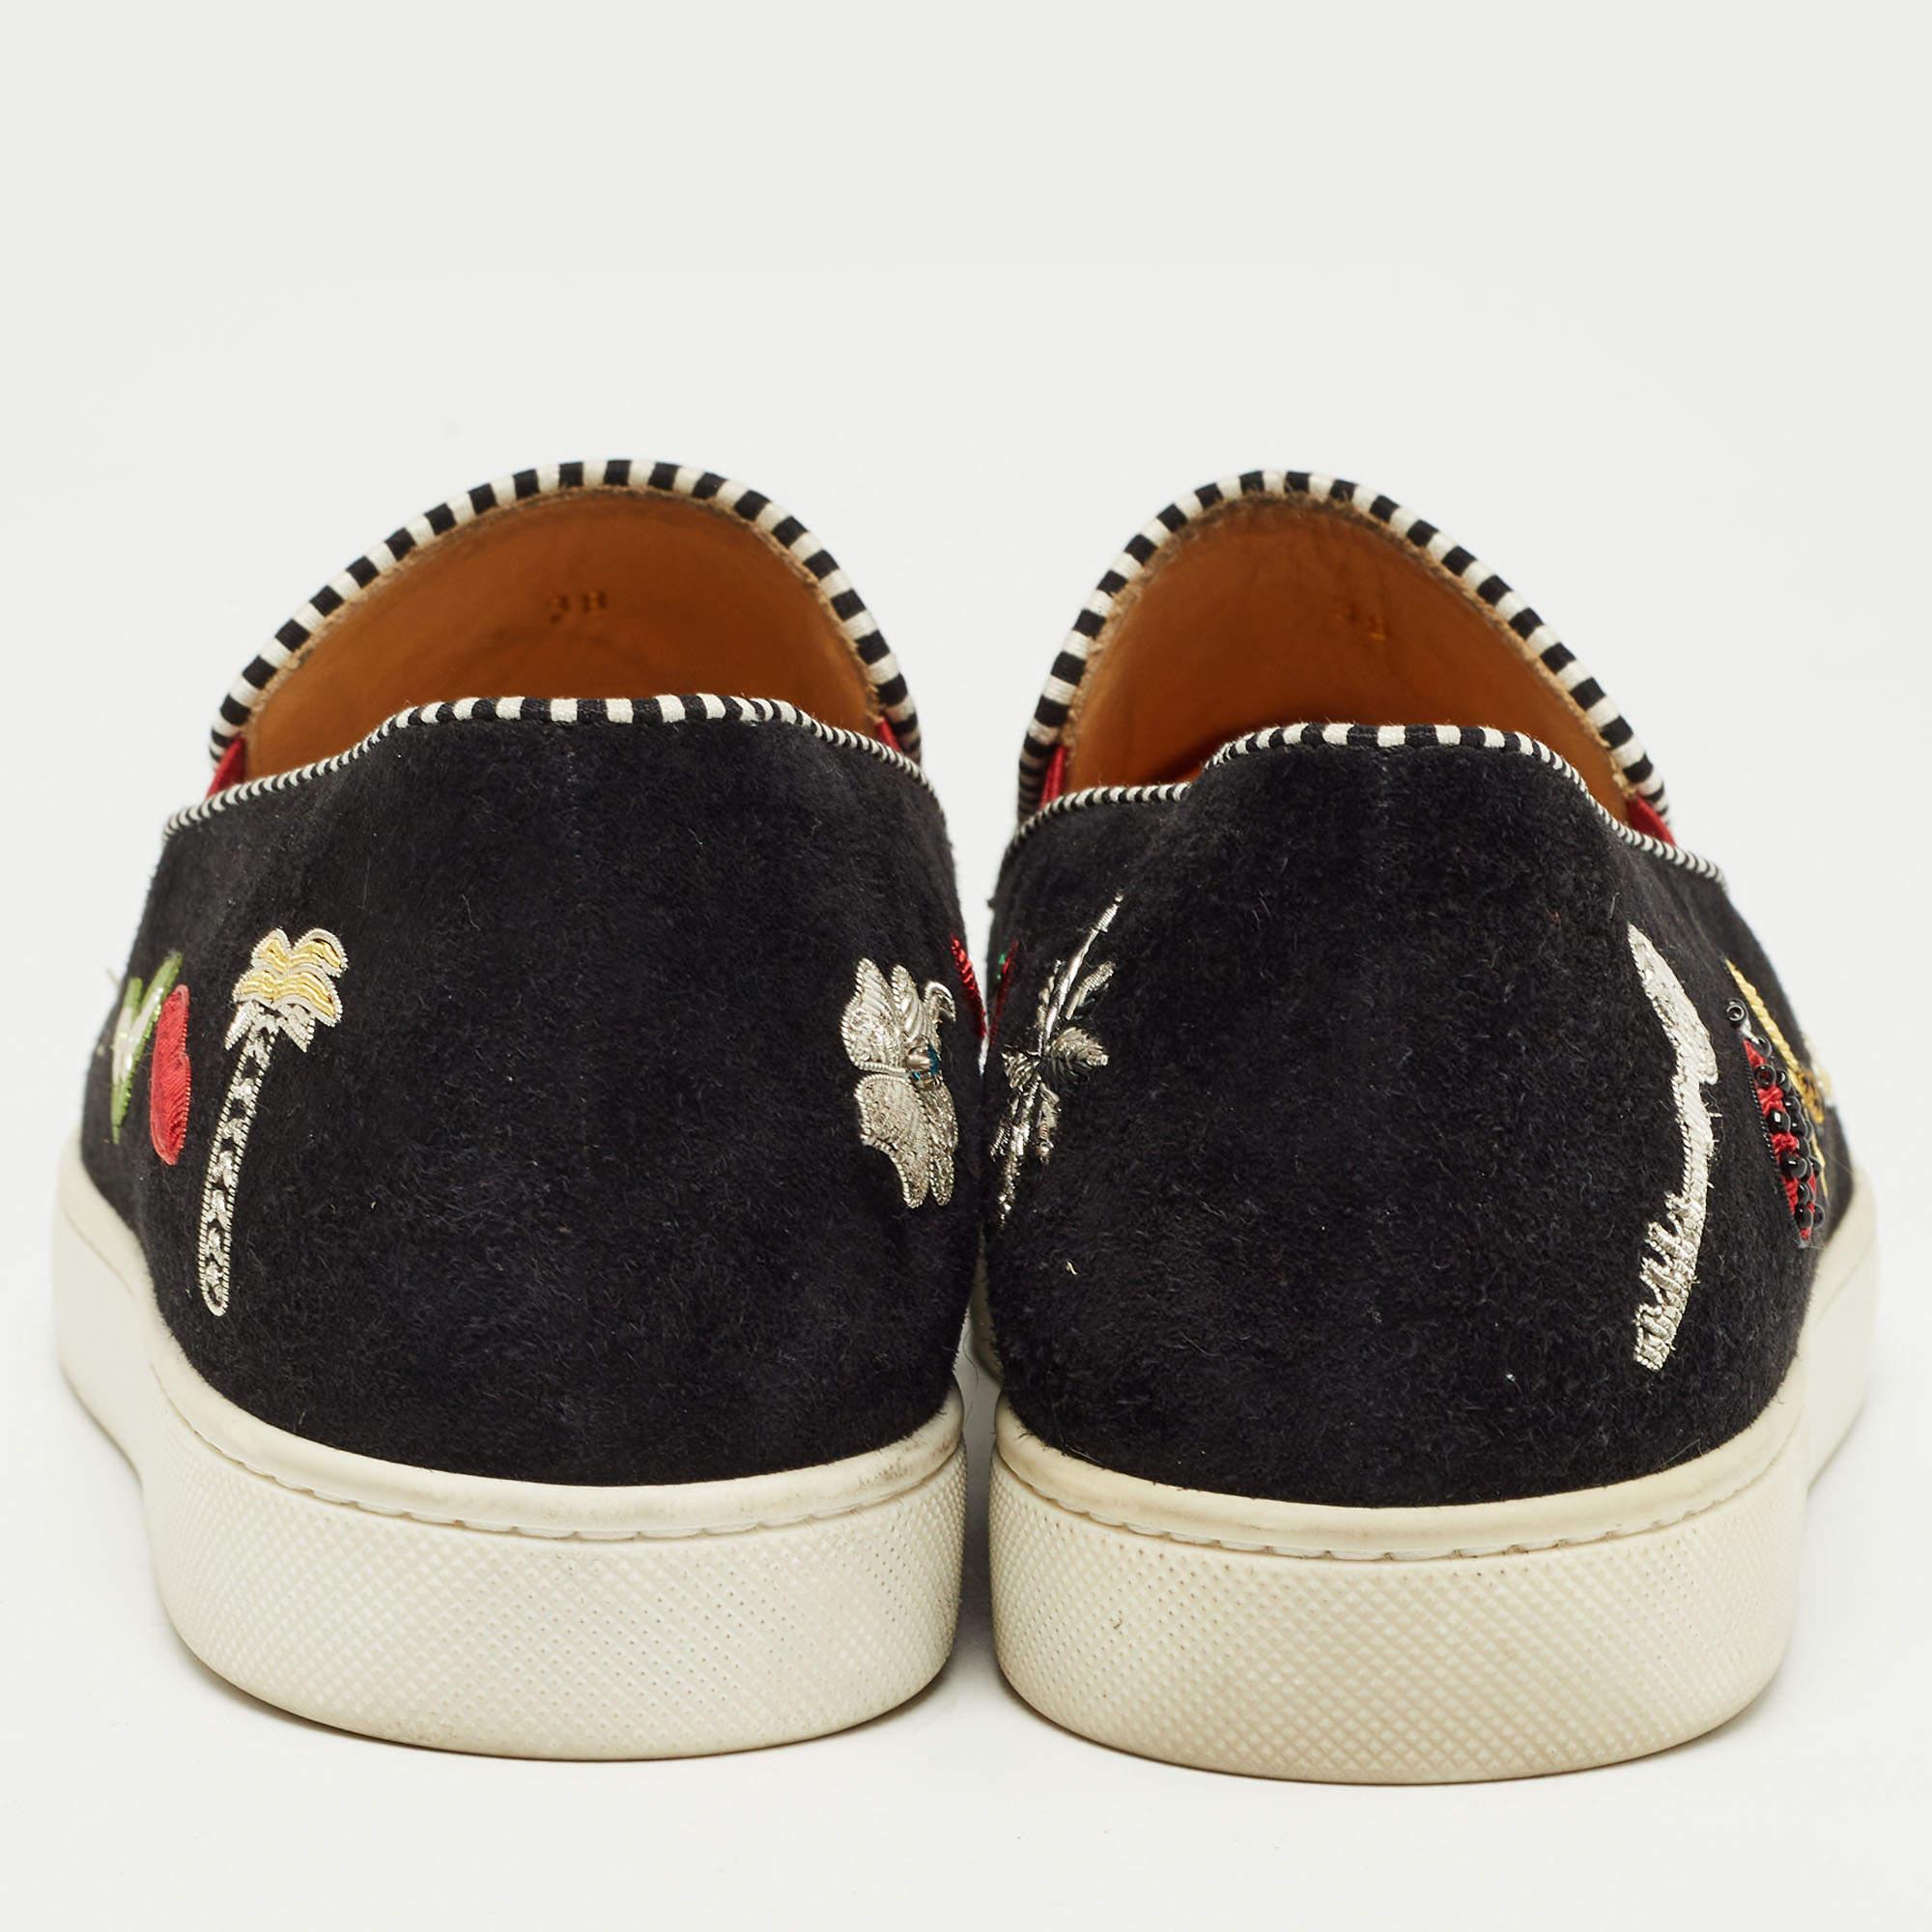 Christian Louboutin Black Suede Pik N Luck Sneakers Size 38 In Good Condition For Sale In Dubai, Al Qouz 2